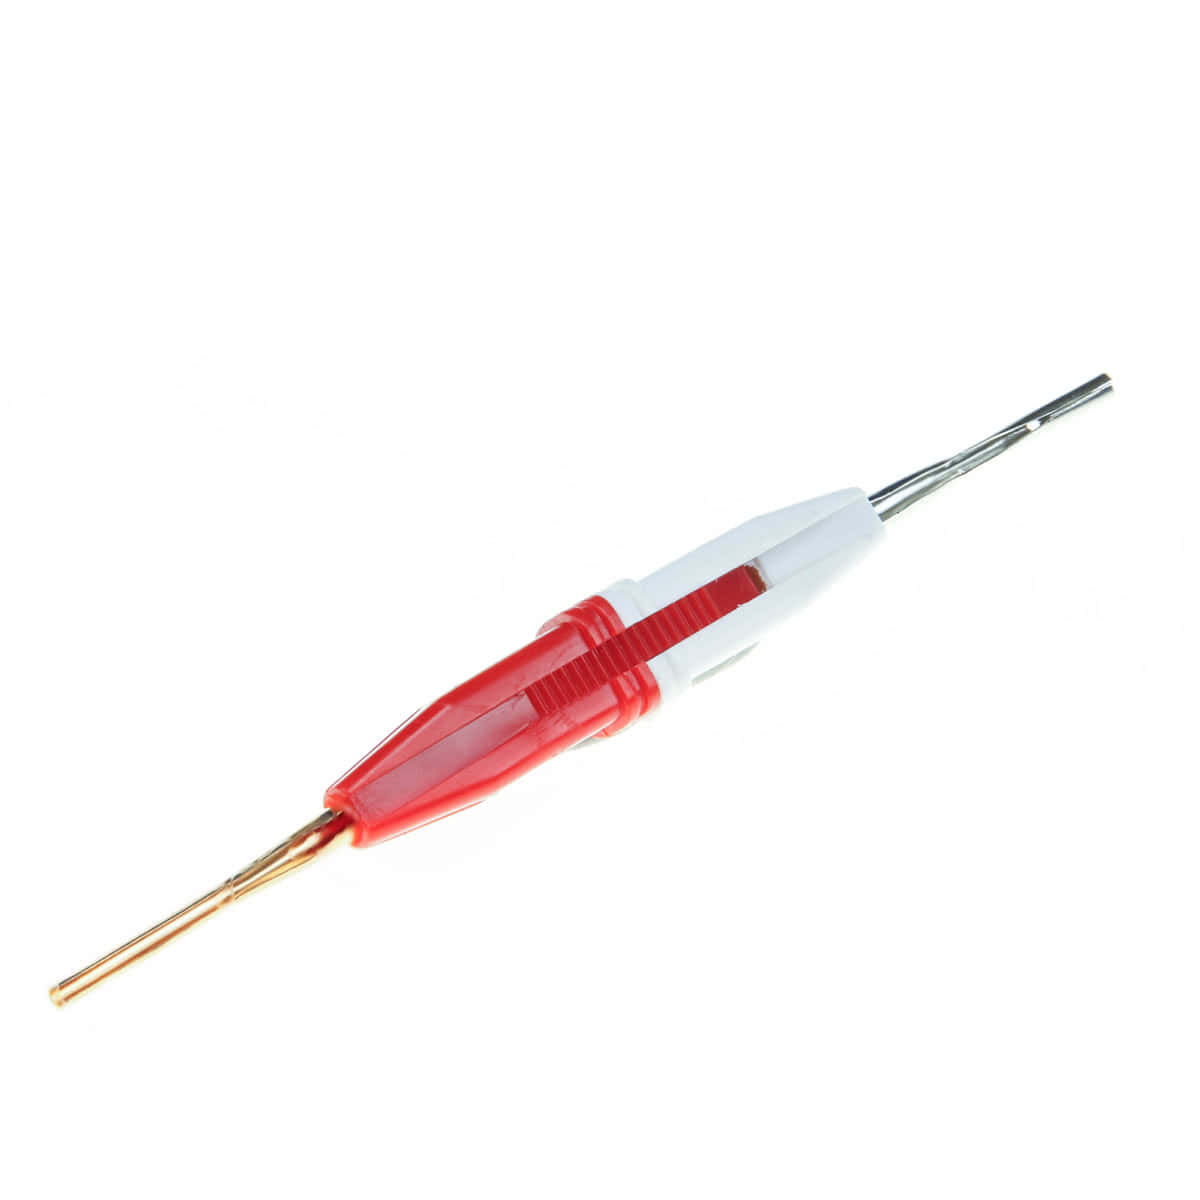 Persecute Memory essay D-Sub Connector Pin Removal Tool